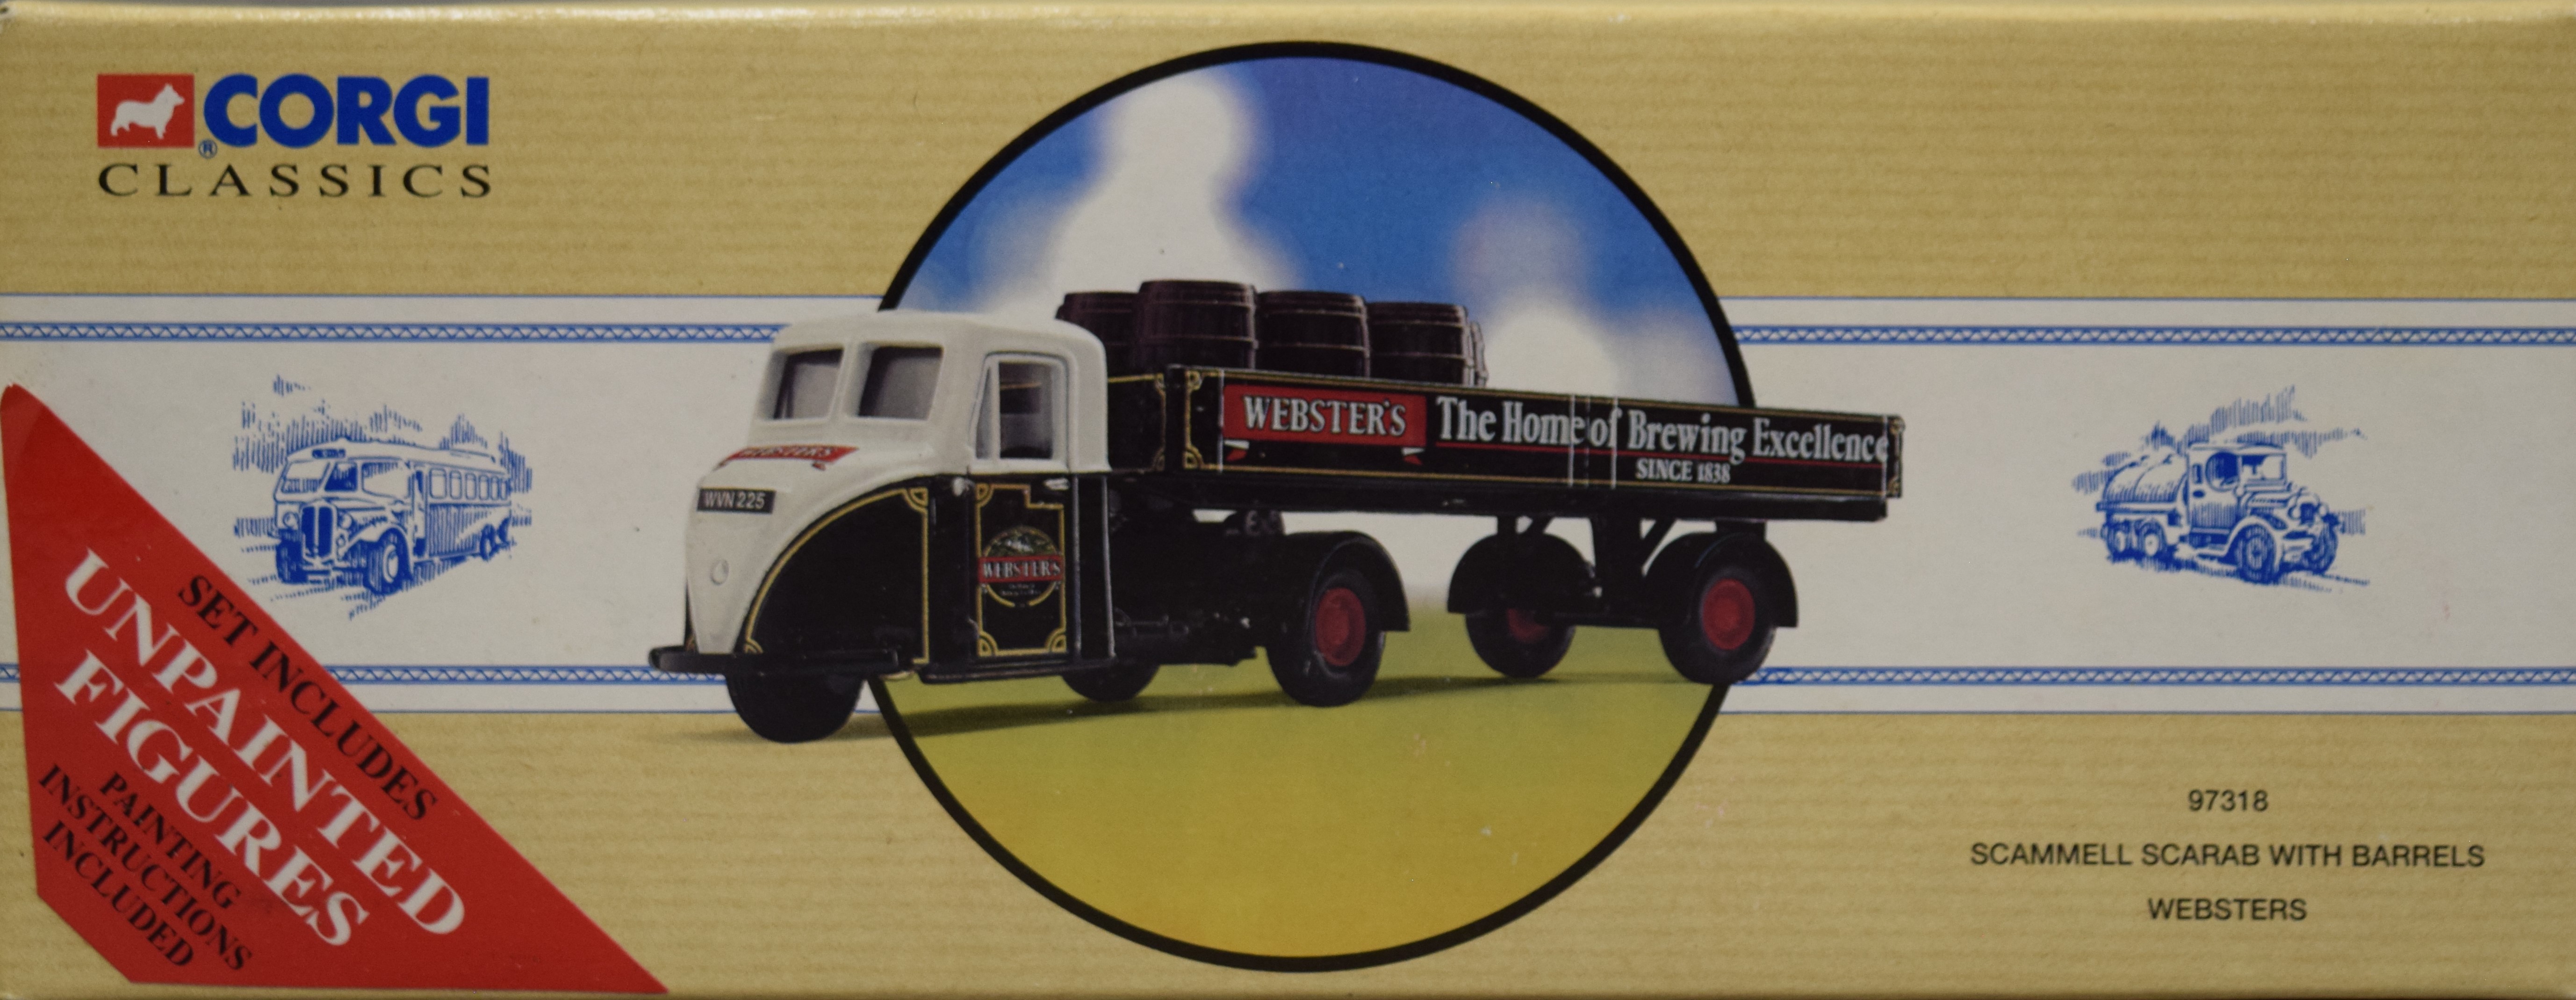 A Corgi Classics Scammel Scarab three-wheeler cab and trailer badges Webster's brewery. - Image 5 of 5